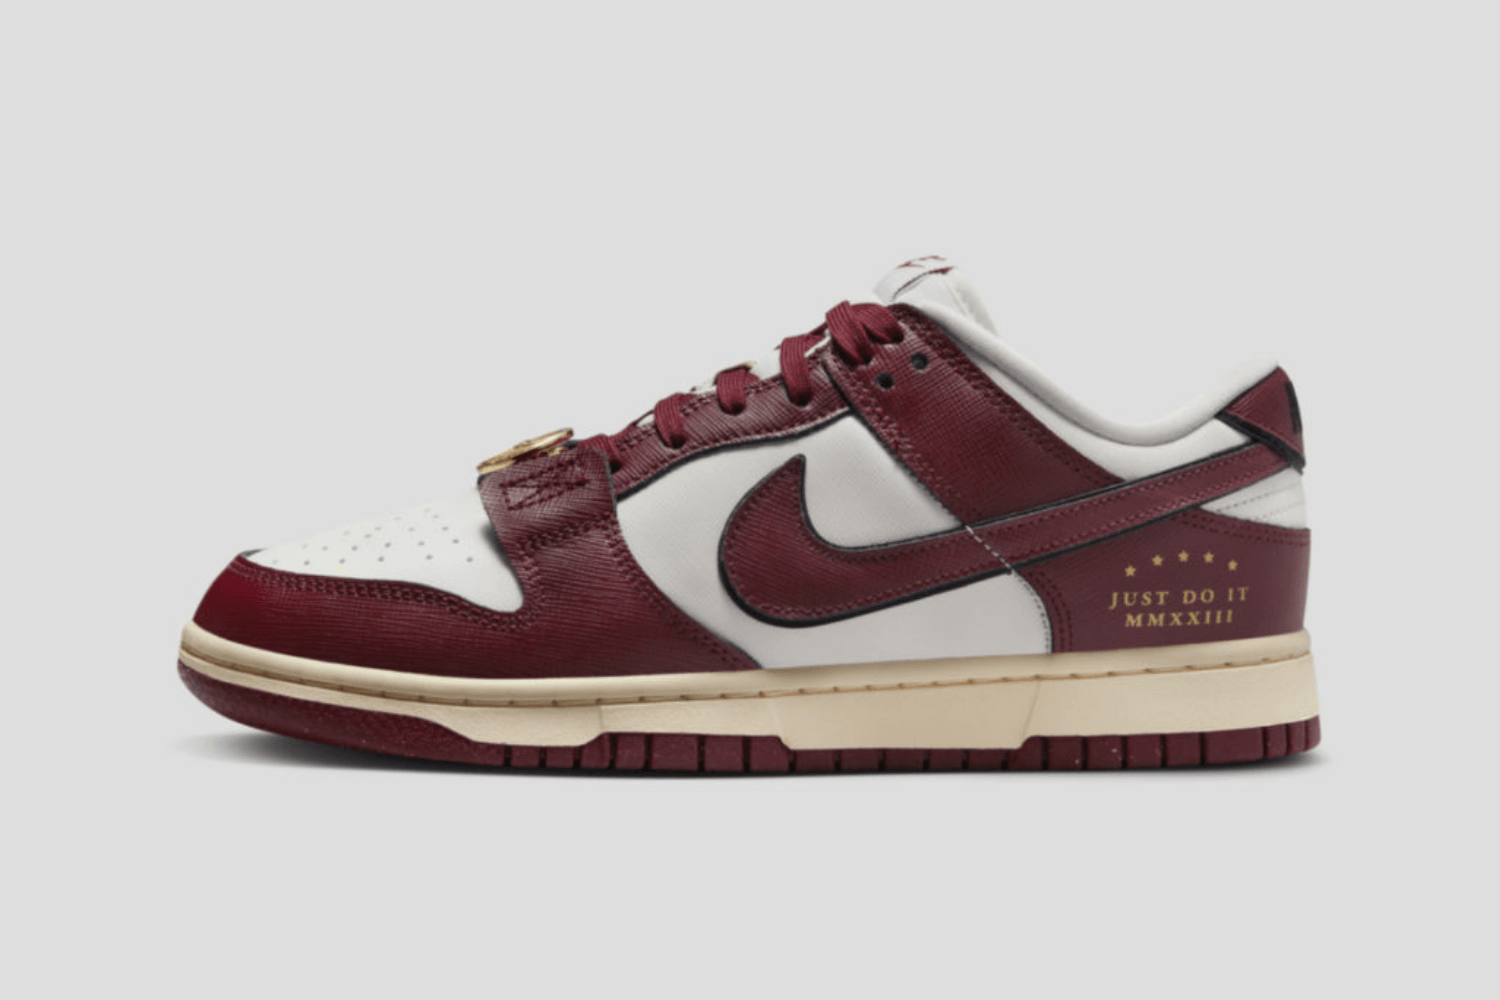 The Nike Dunk Low 'Team Red' comes with gold accents